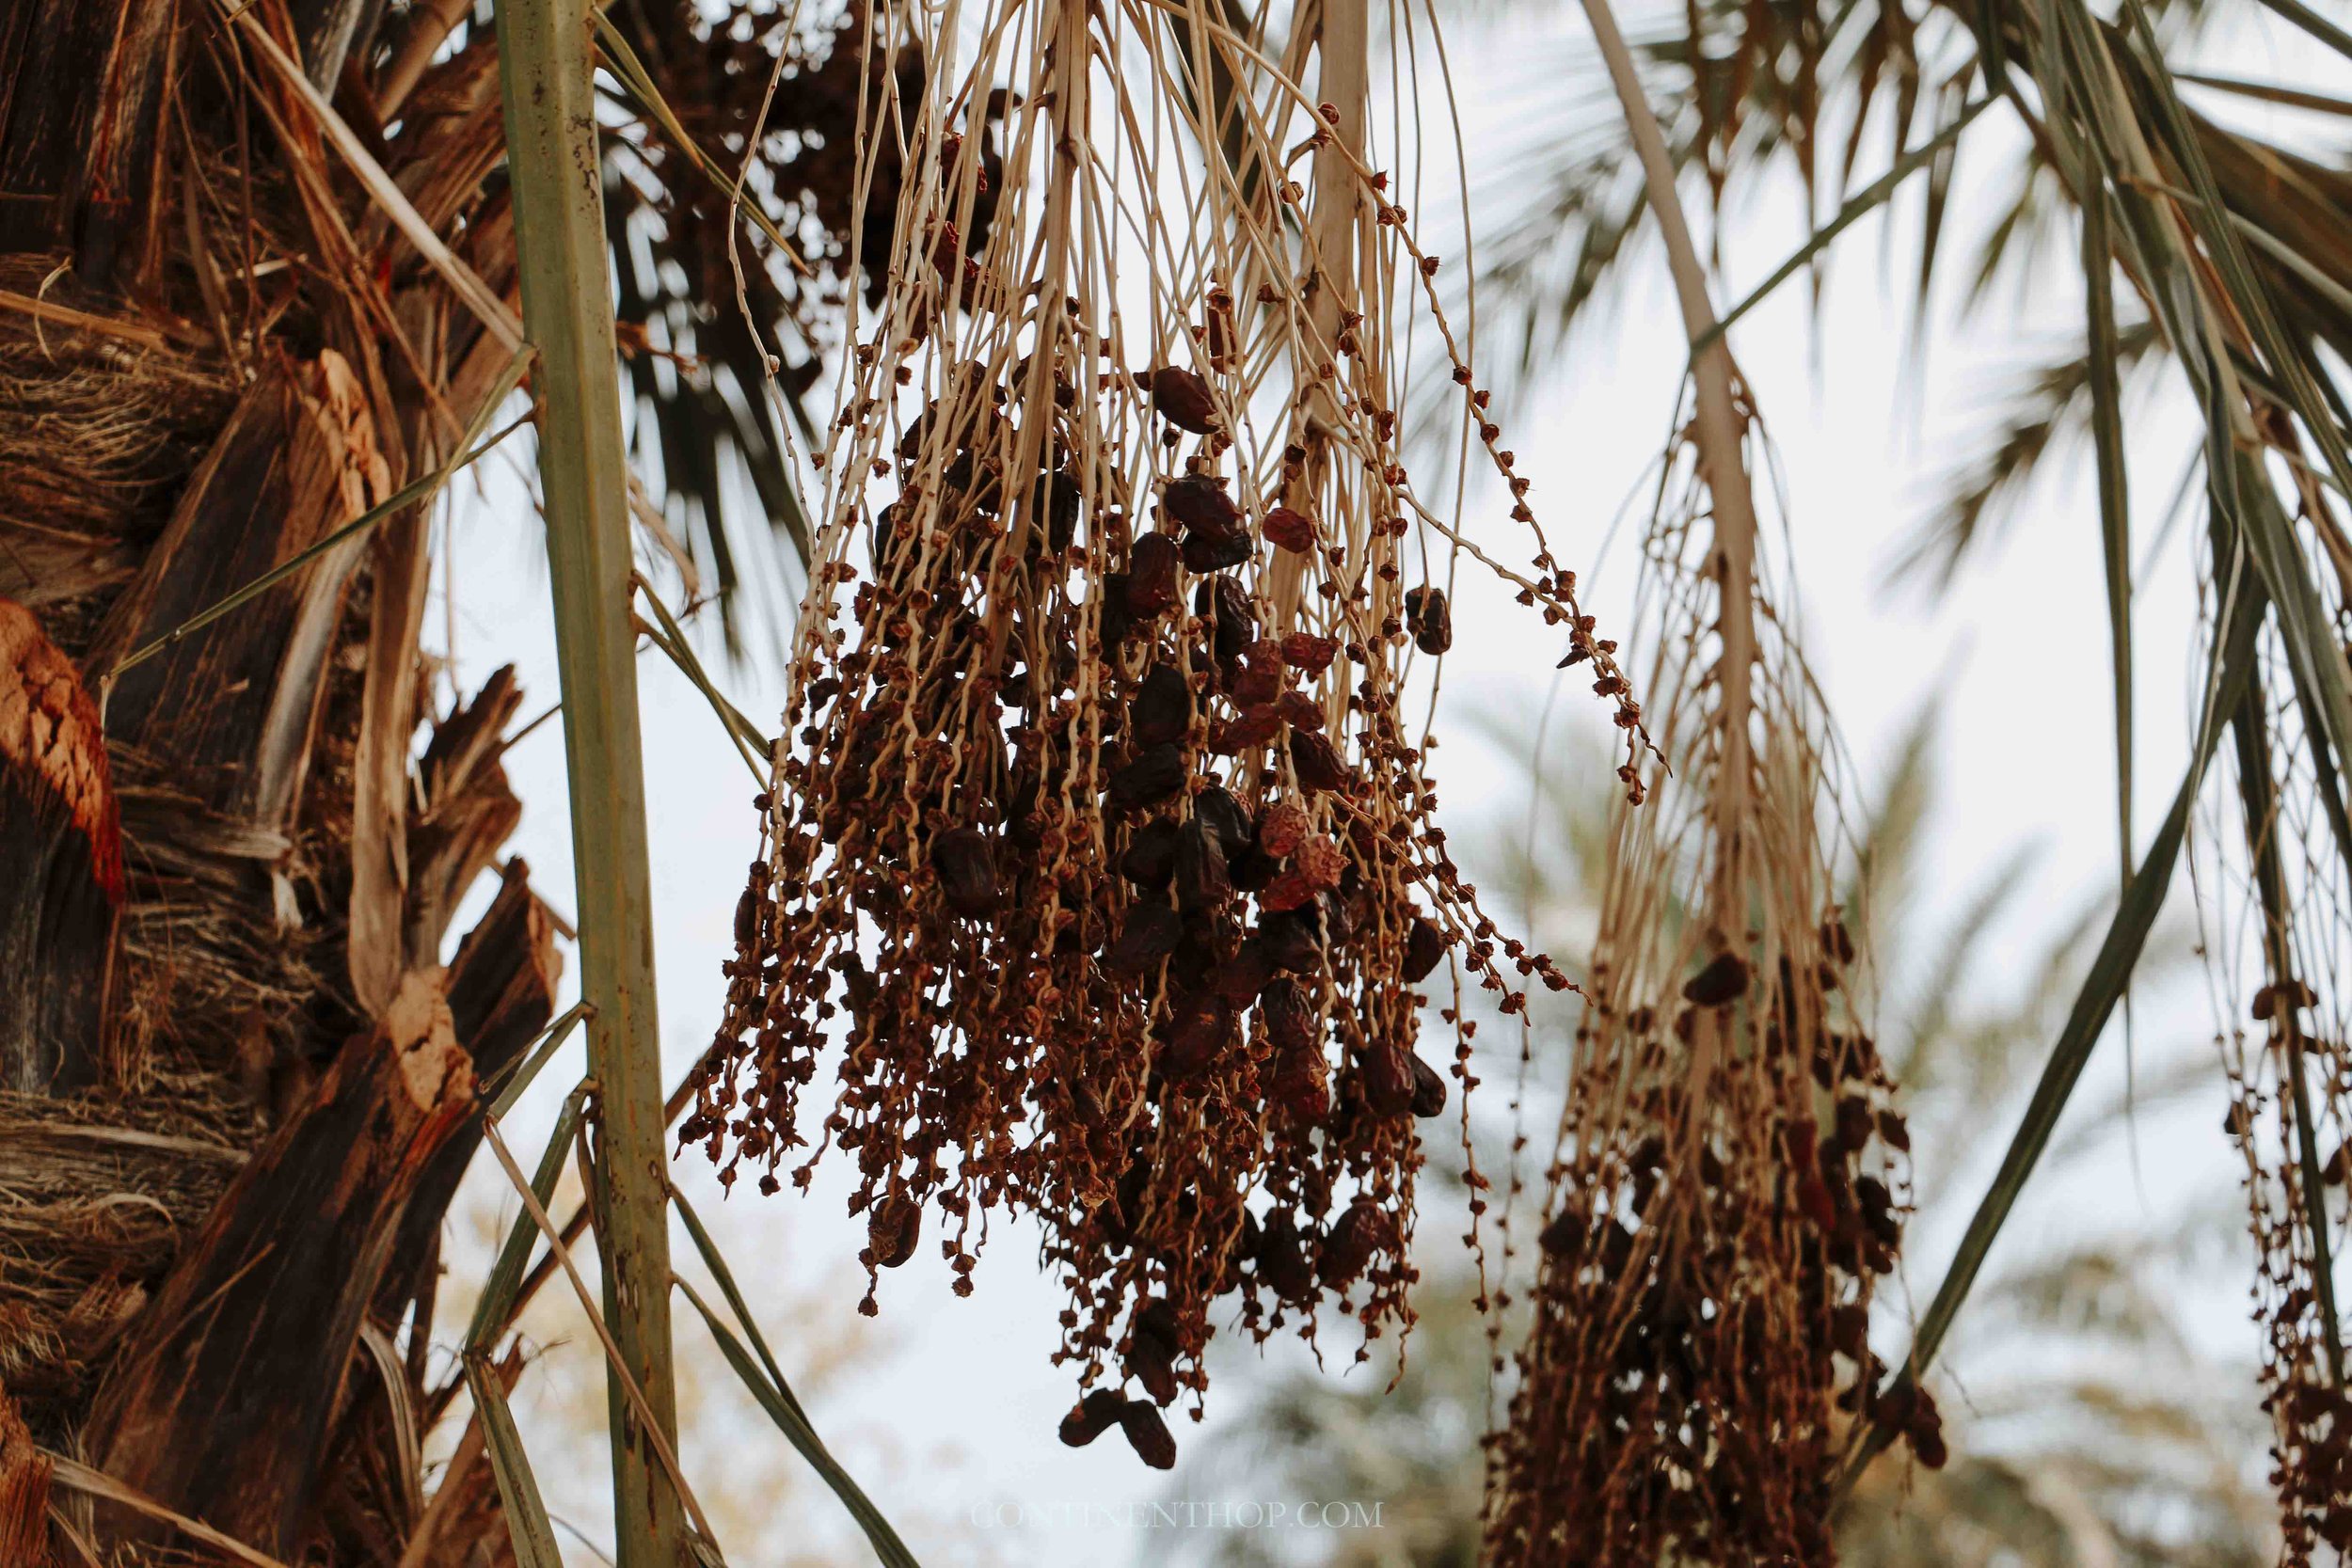 Dates growing on a tree in Marrakech on a luxury desert tours from marrakech